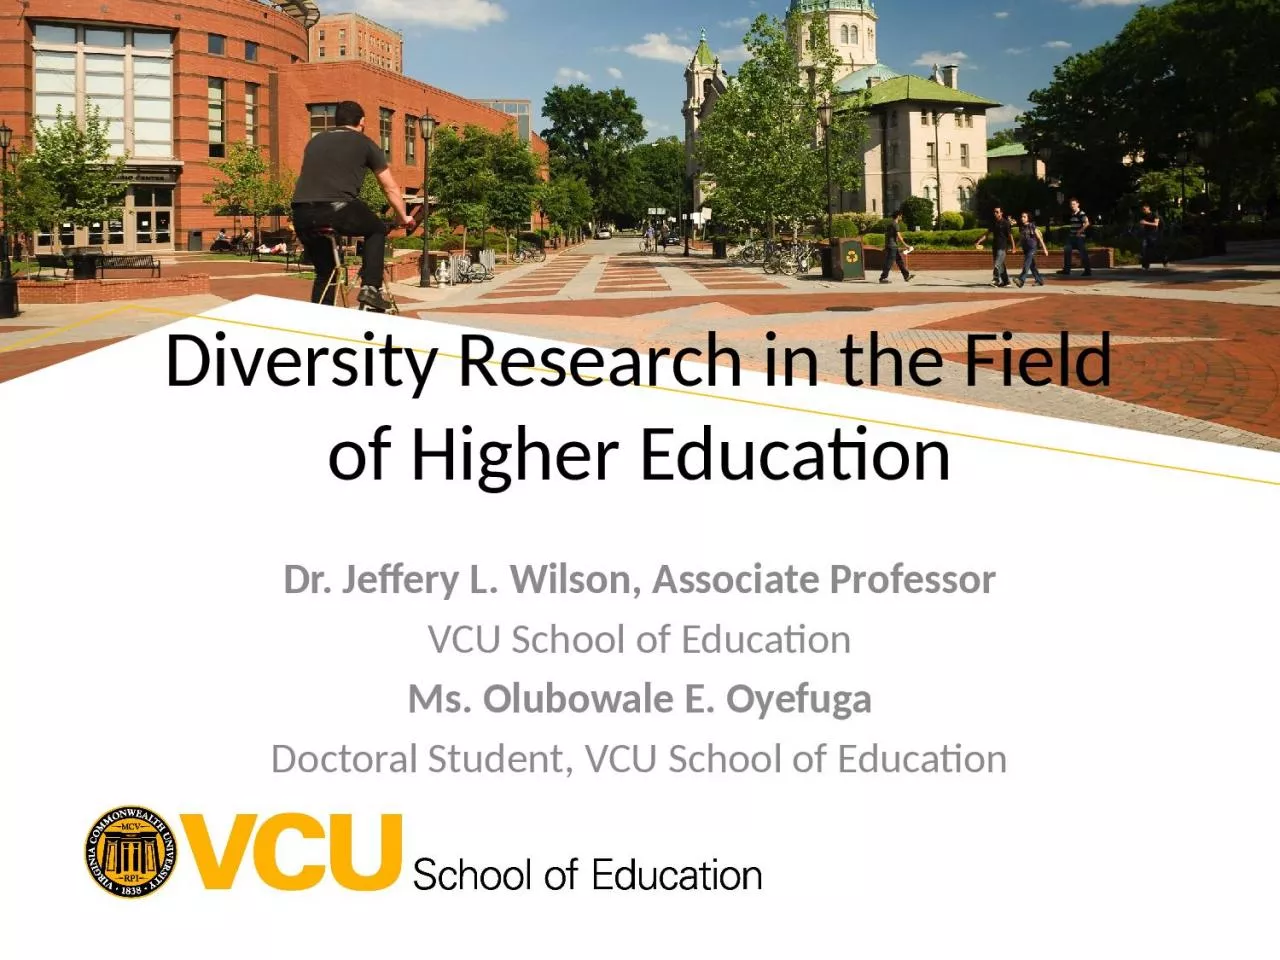 Diversity Research in the Field